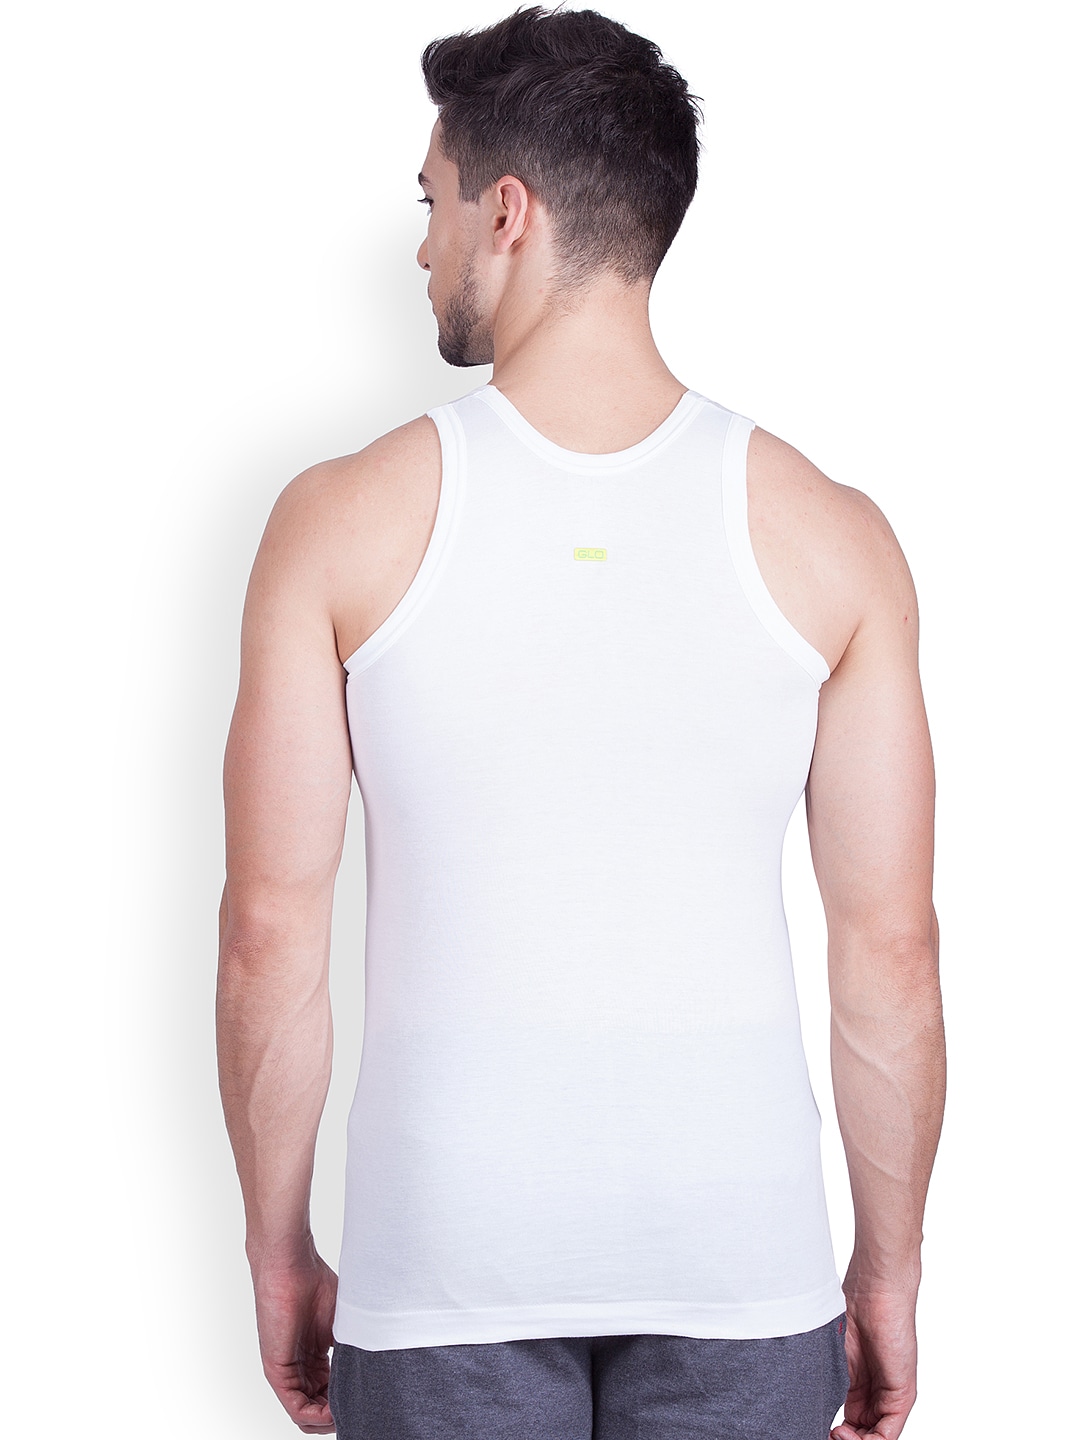 Clothing Innerwear Vests | Lux Cozi Pack of 6 Innerwear Vests COZI_GLO_WH_90 - HW56627